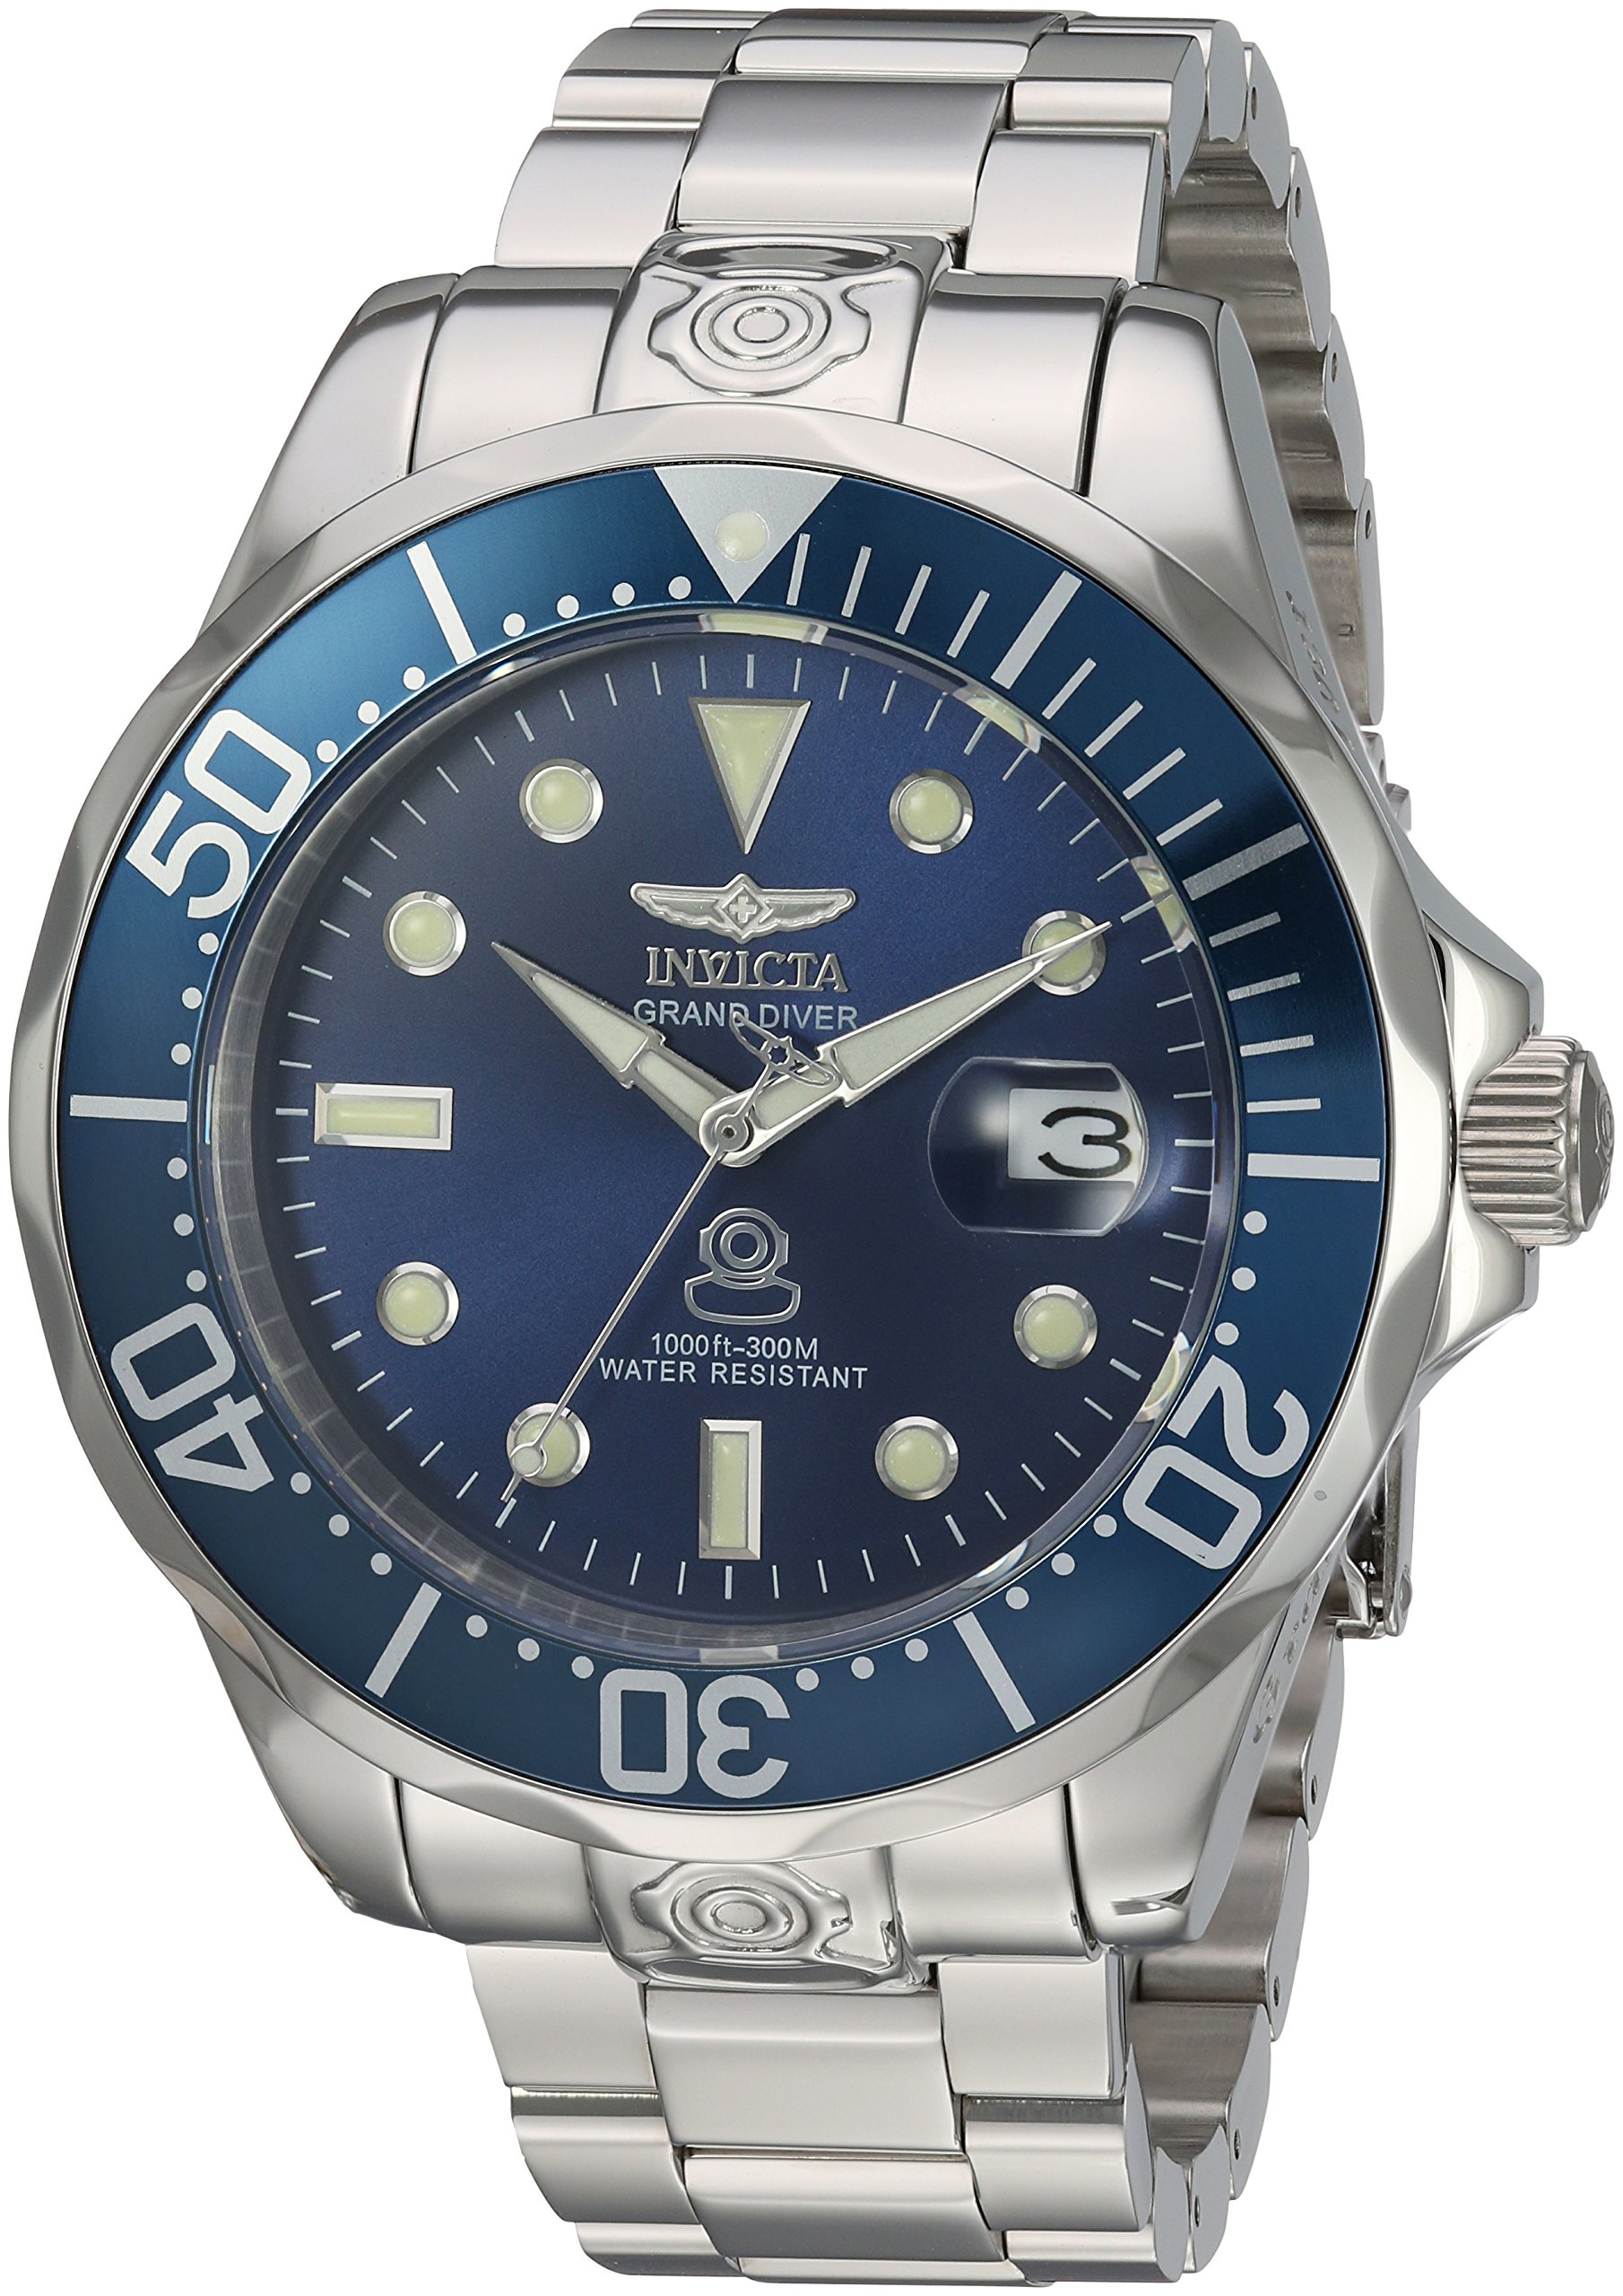 Invicta Men's 'Pro Diver' Automatic Stainless Steel Diving Watch, Silver-Toned (16036)